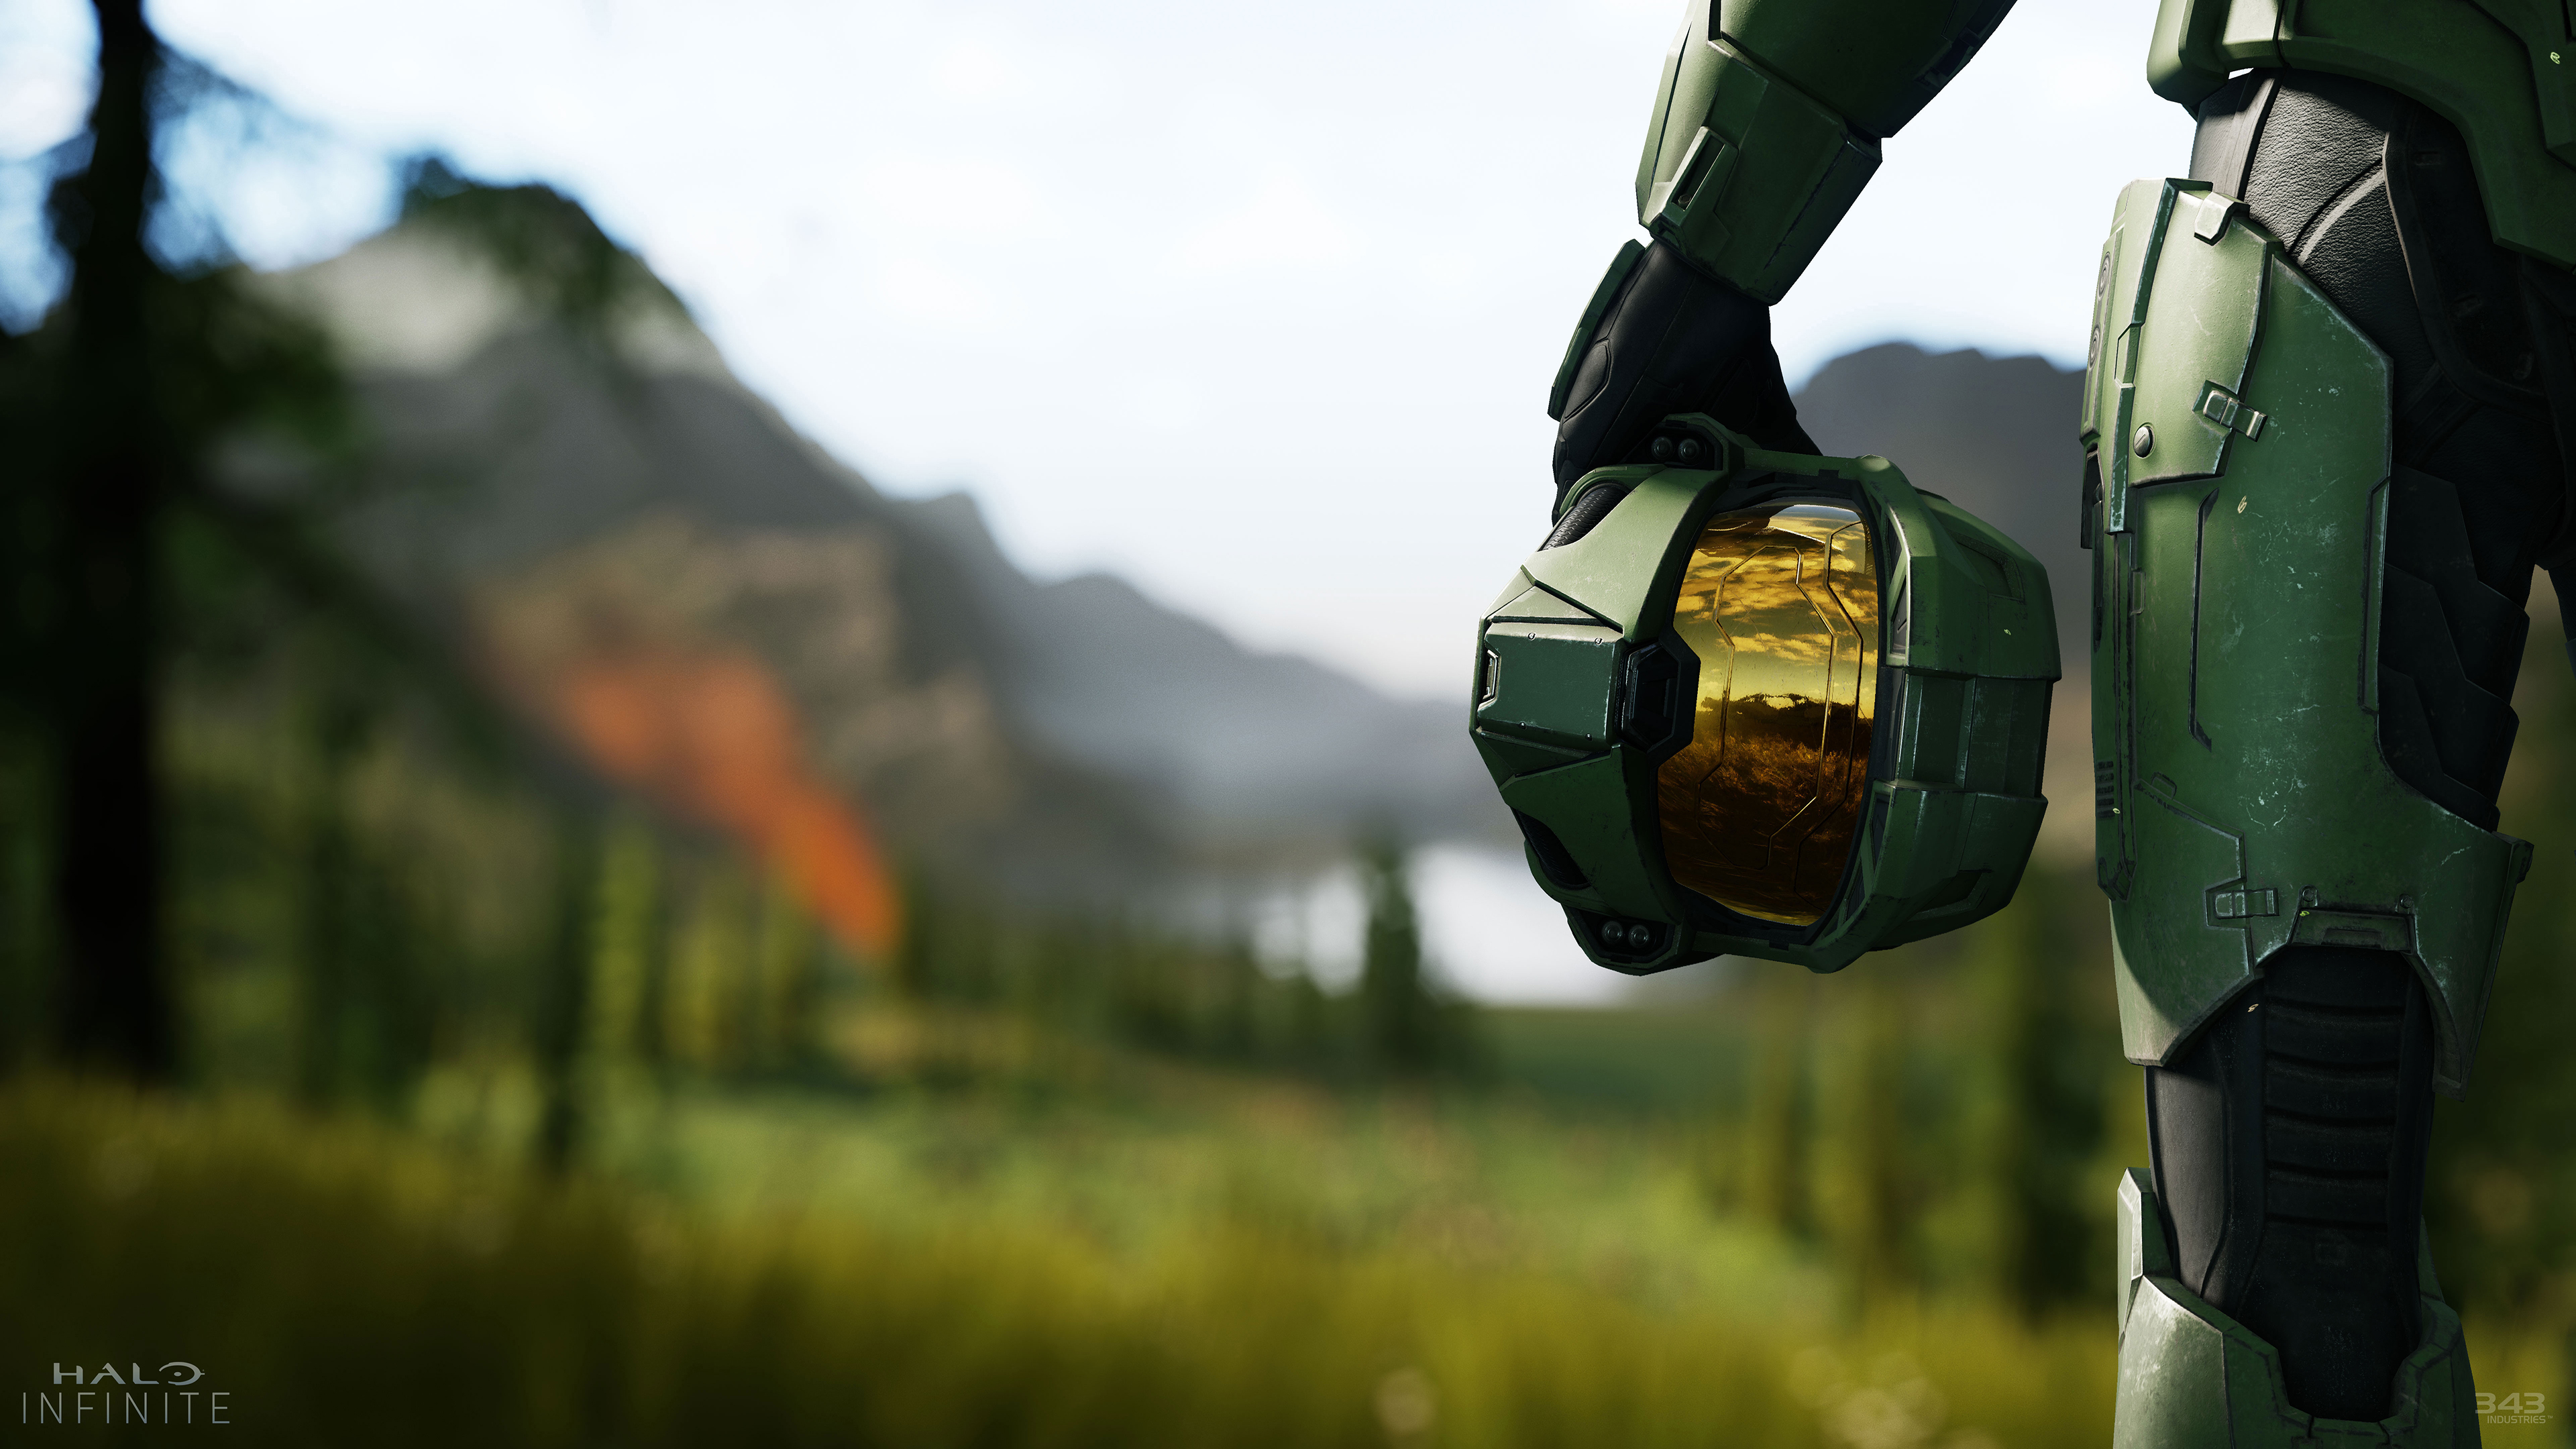 General 3840x2160 Halo (game) science fiction military soldier Xbox Xbox One video games Master Chief (Halo) Halo Infinite video game art helmet futuristic armor video game characters